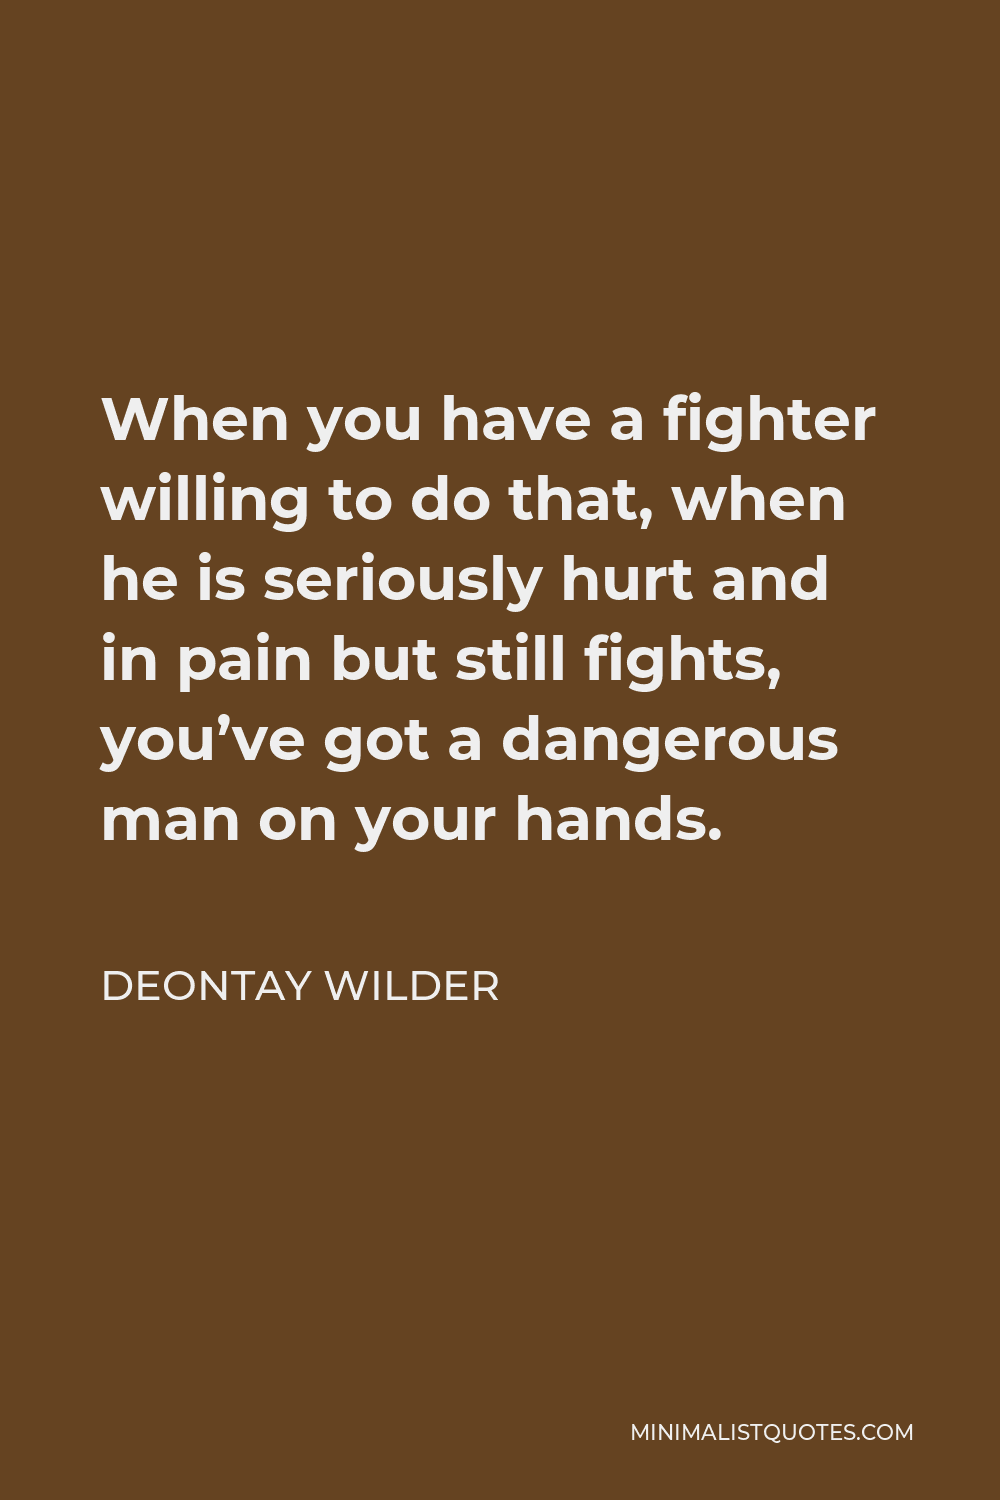 Deontay Wilder Quote - When you have a fighter willing to do that, when he is seriously hurt and in pain but still fights, you’ve got a dangerous man on your hands.